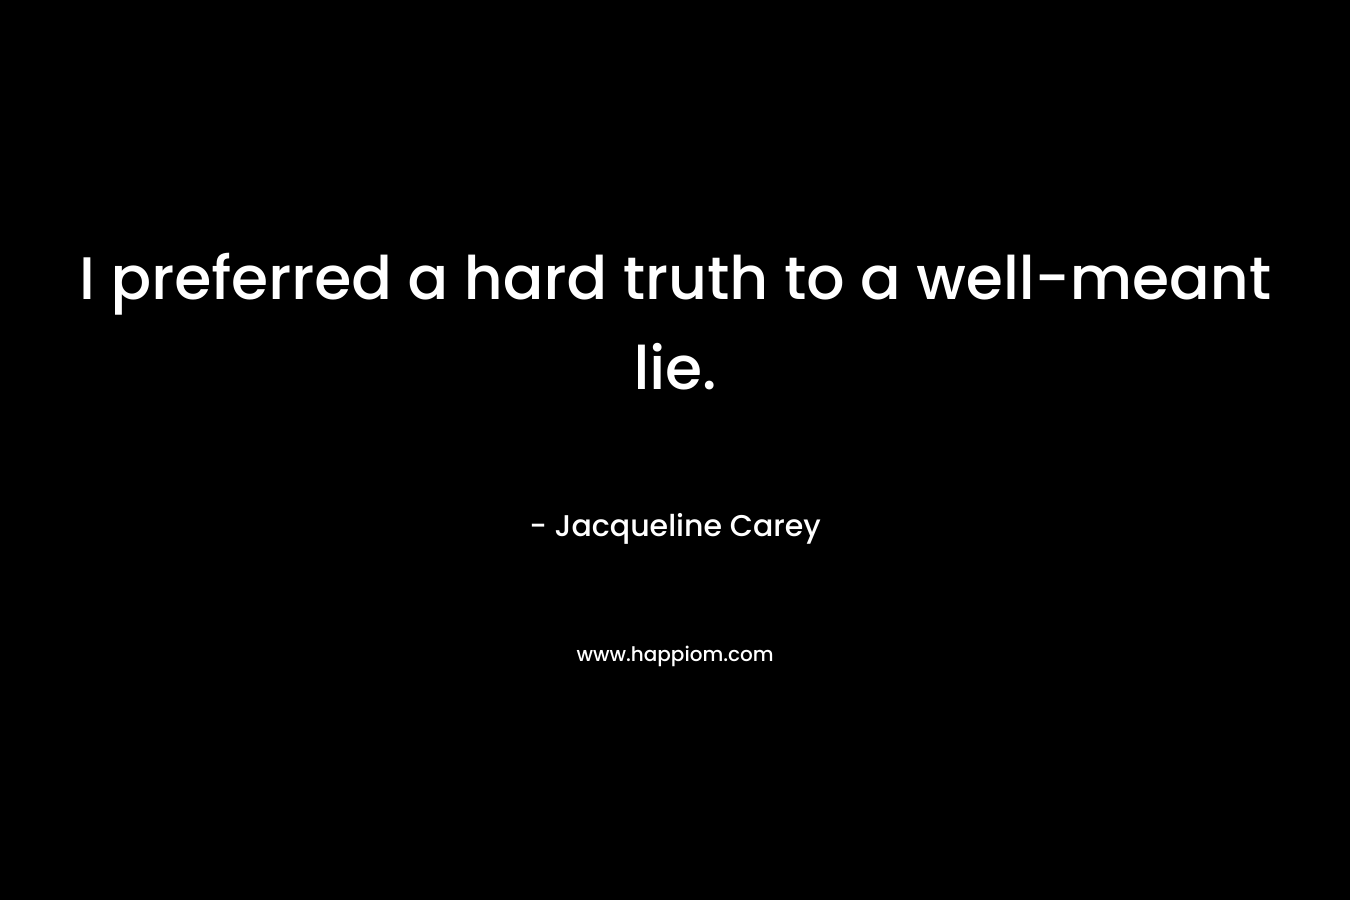 I preferred a hard truth to a well-meant lie. – Jacqueline Carey